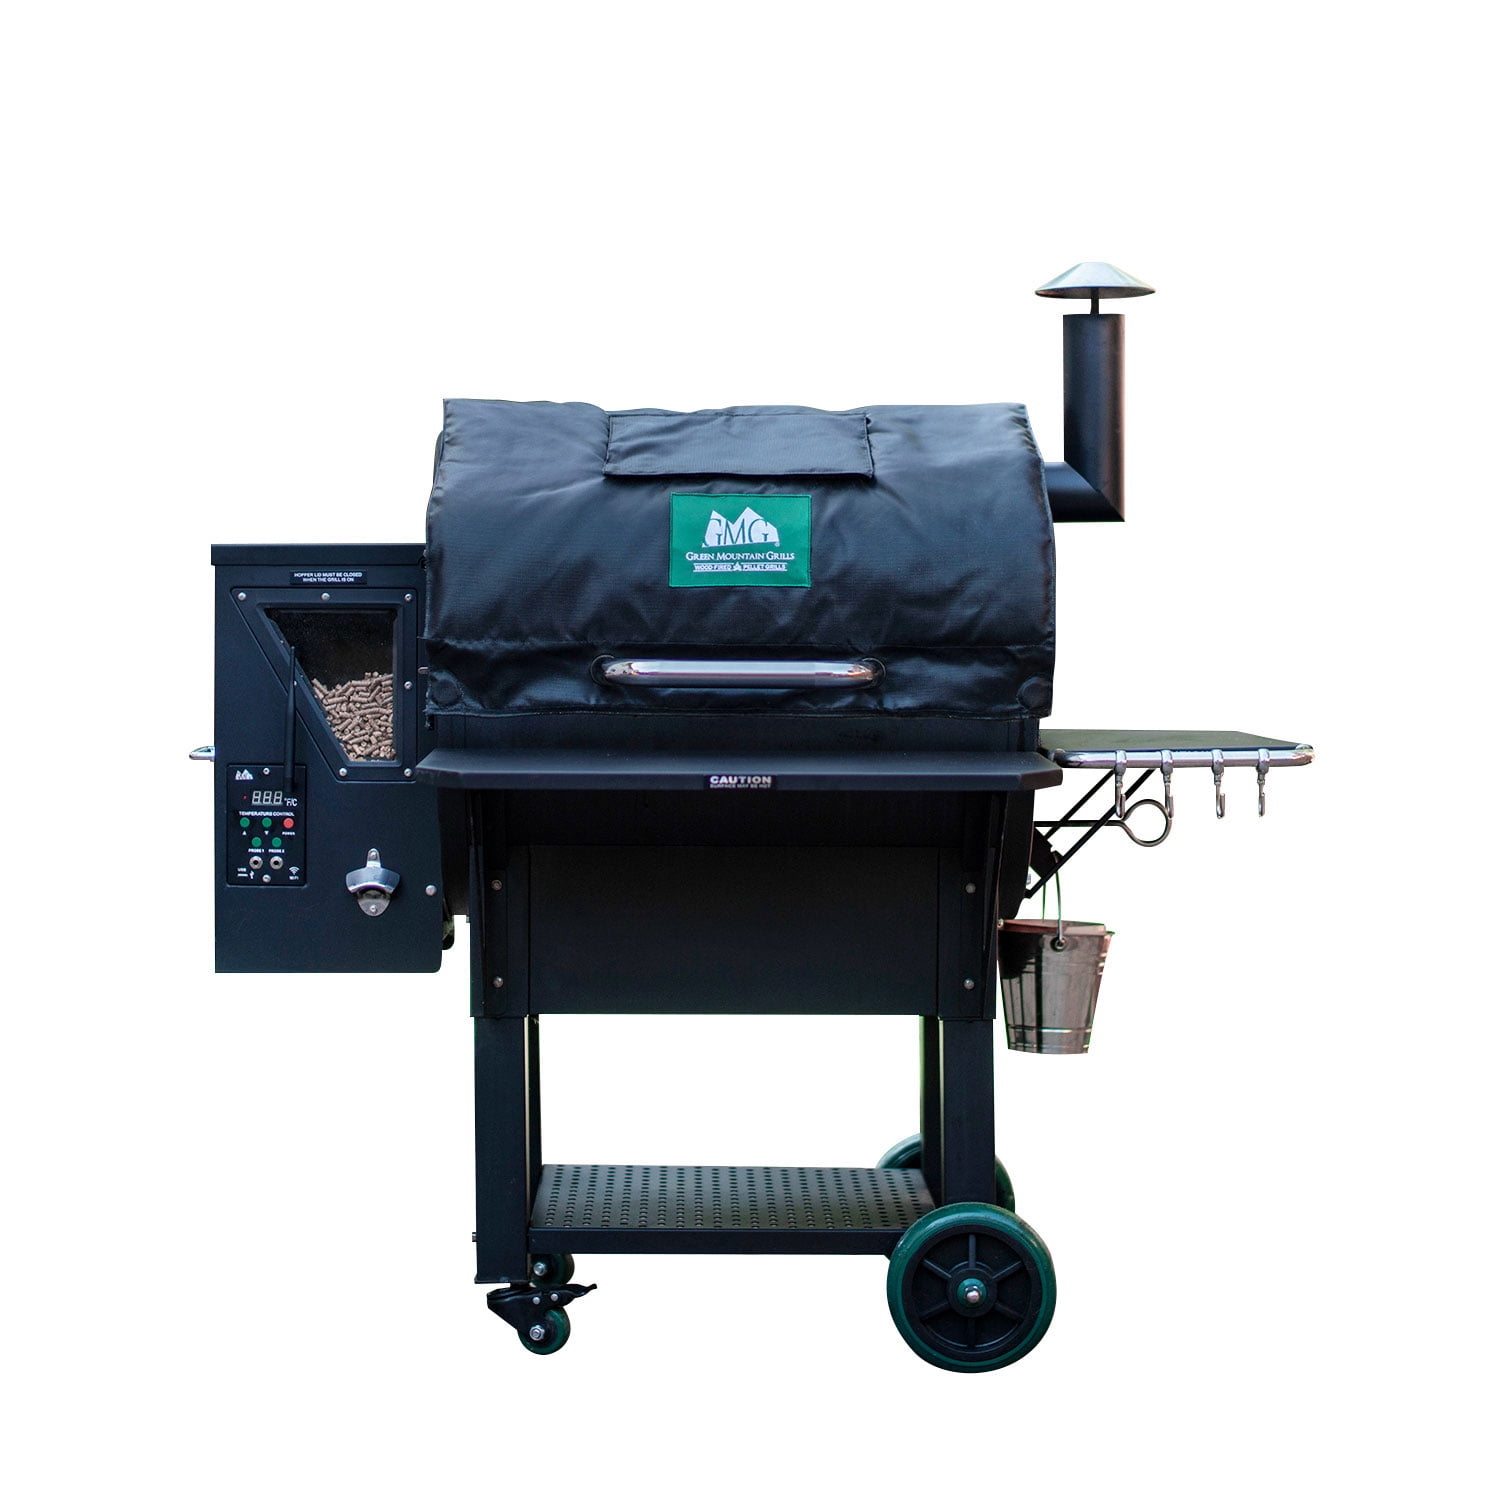 Green Mountain Grill Daniel Boone Thermal Blanket & Cover GMG-6031 & 3003 